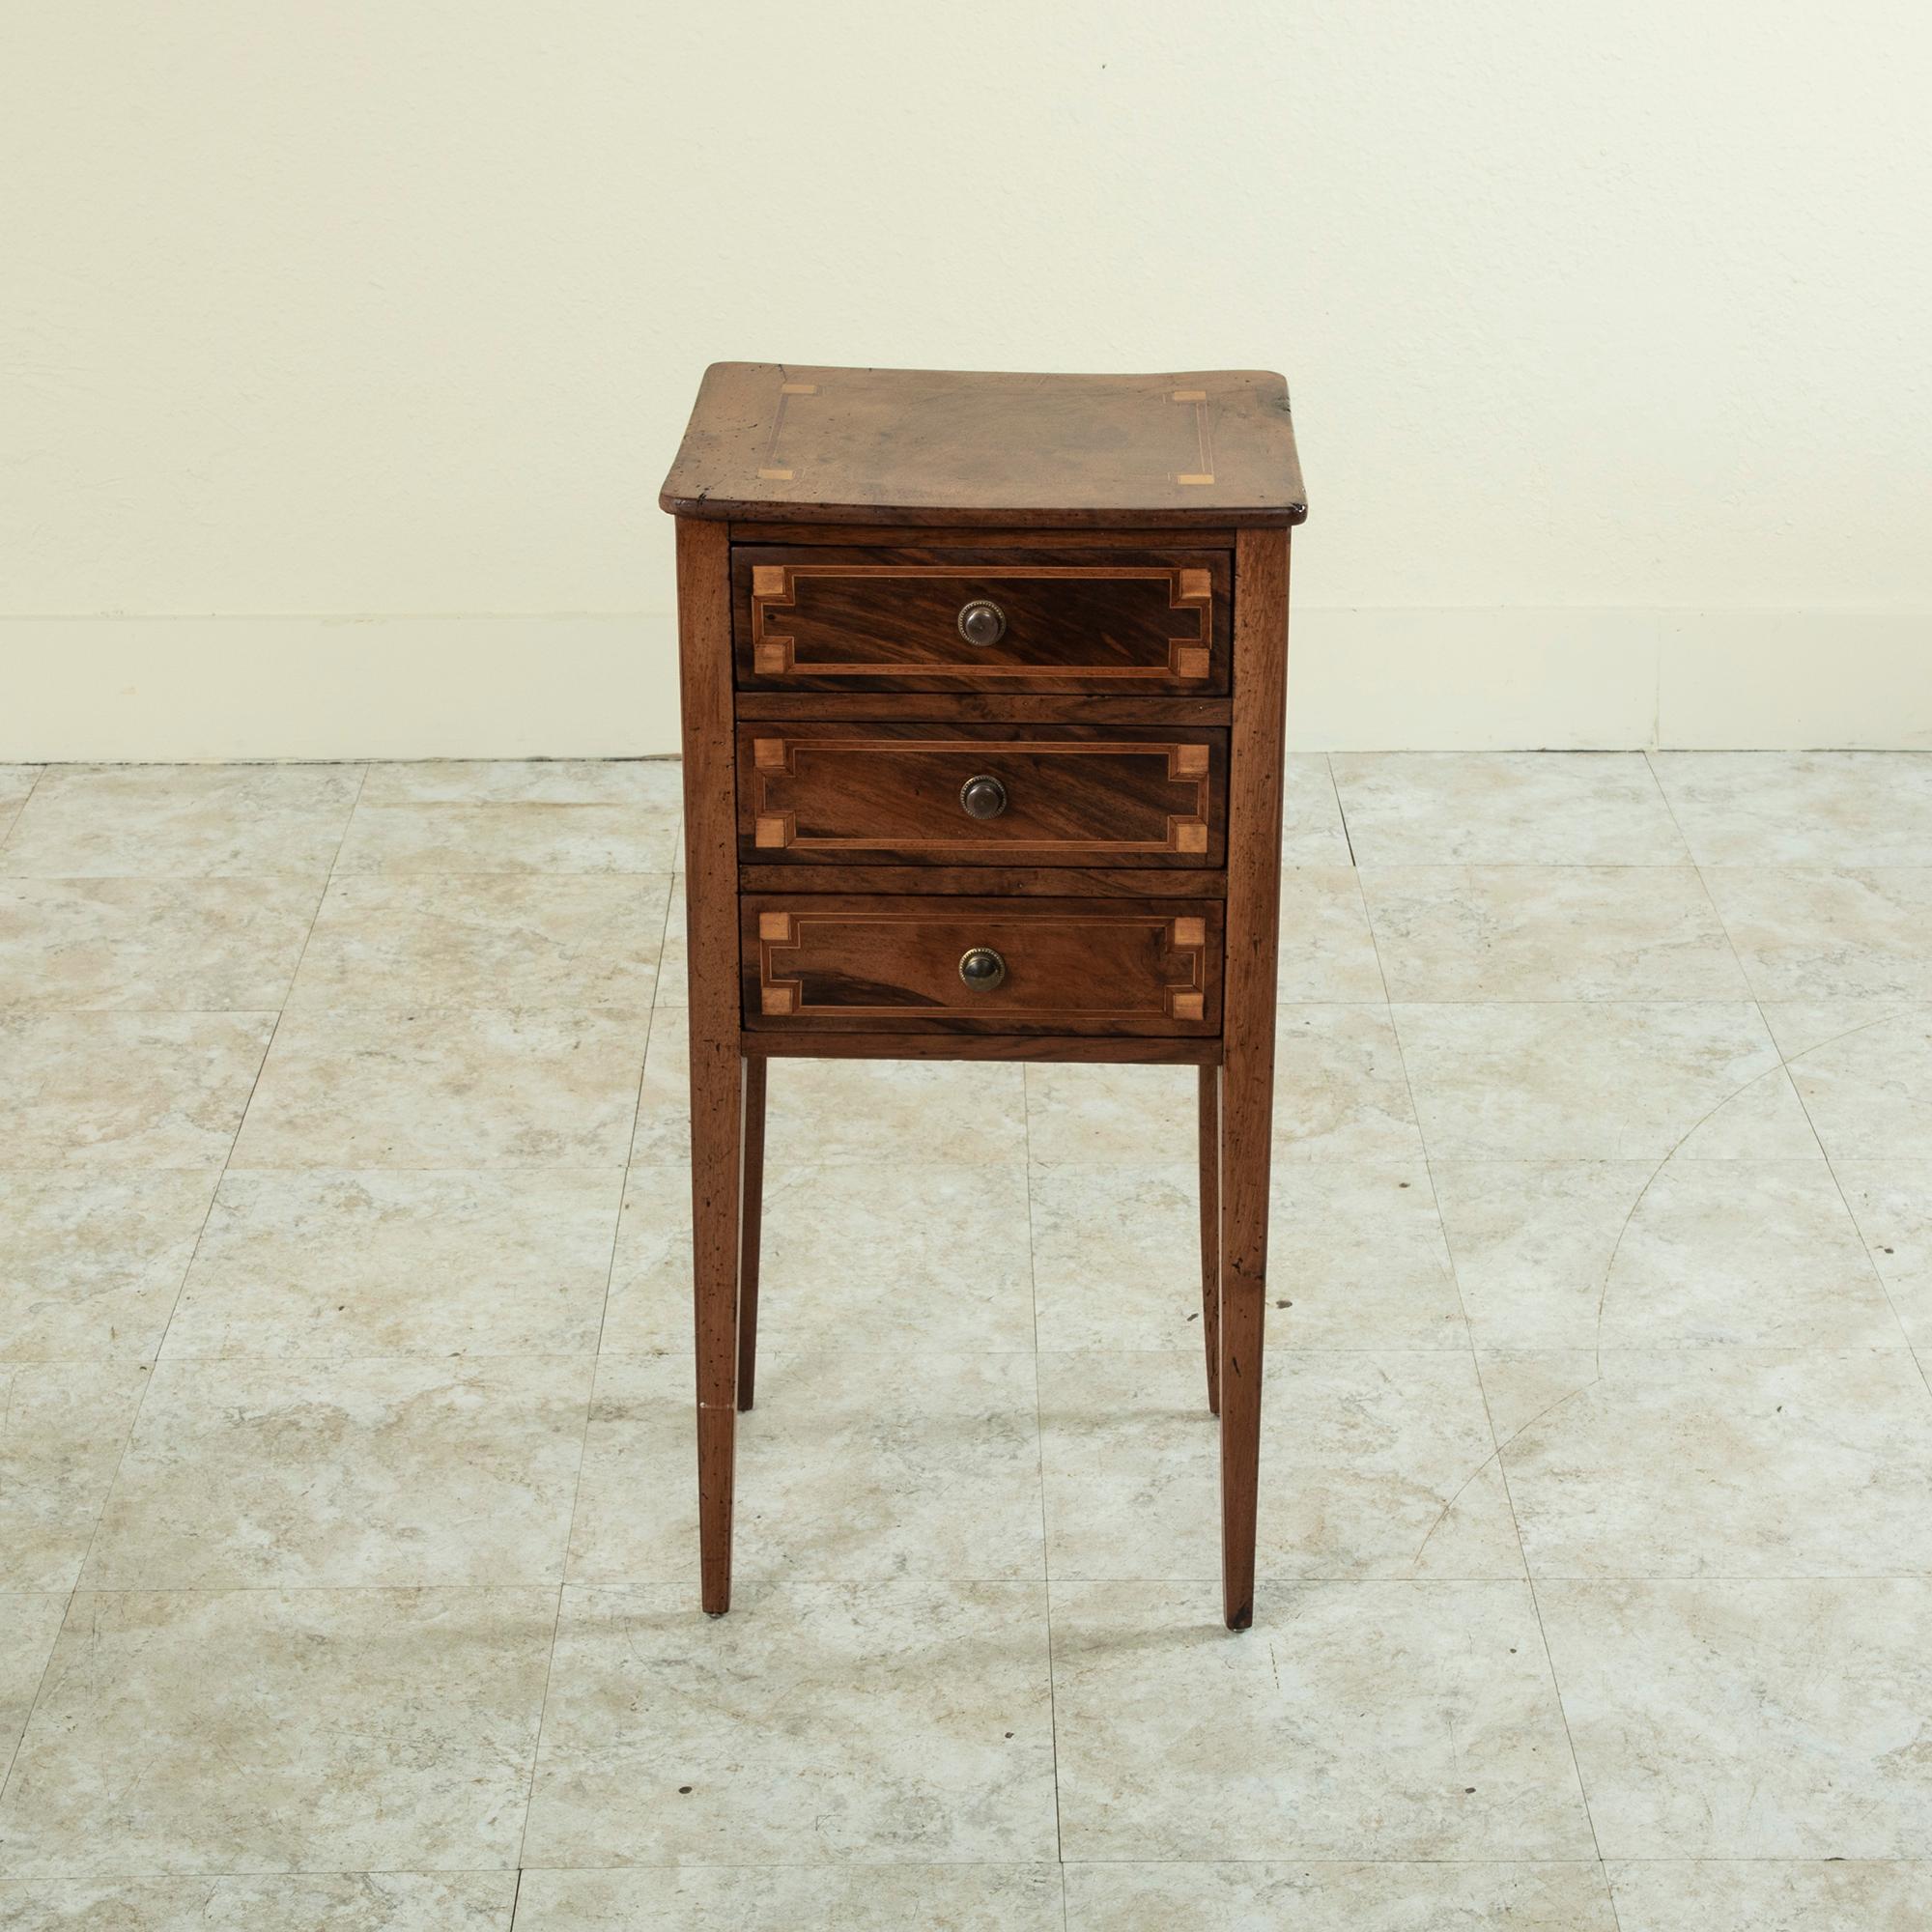 From the city of Lyon, this late eighteenth century French Louis XVI period cherrywood nightstand or side table features inlaid lemonwood and walnut that create an inset border with indented corners on the top and drawer fronts. Its three drawers of